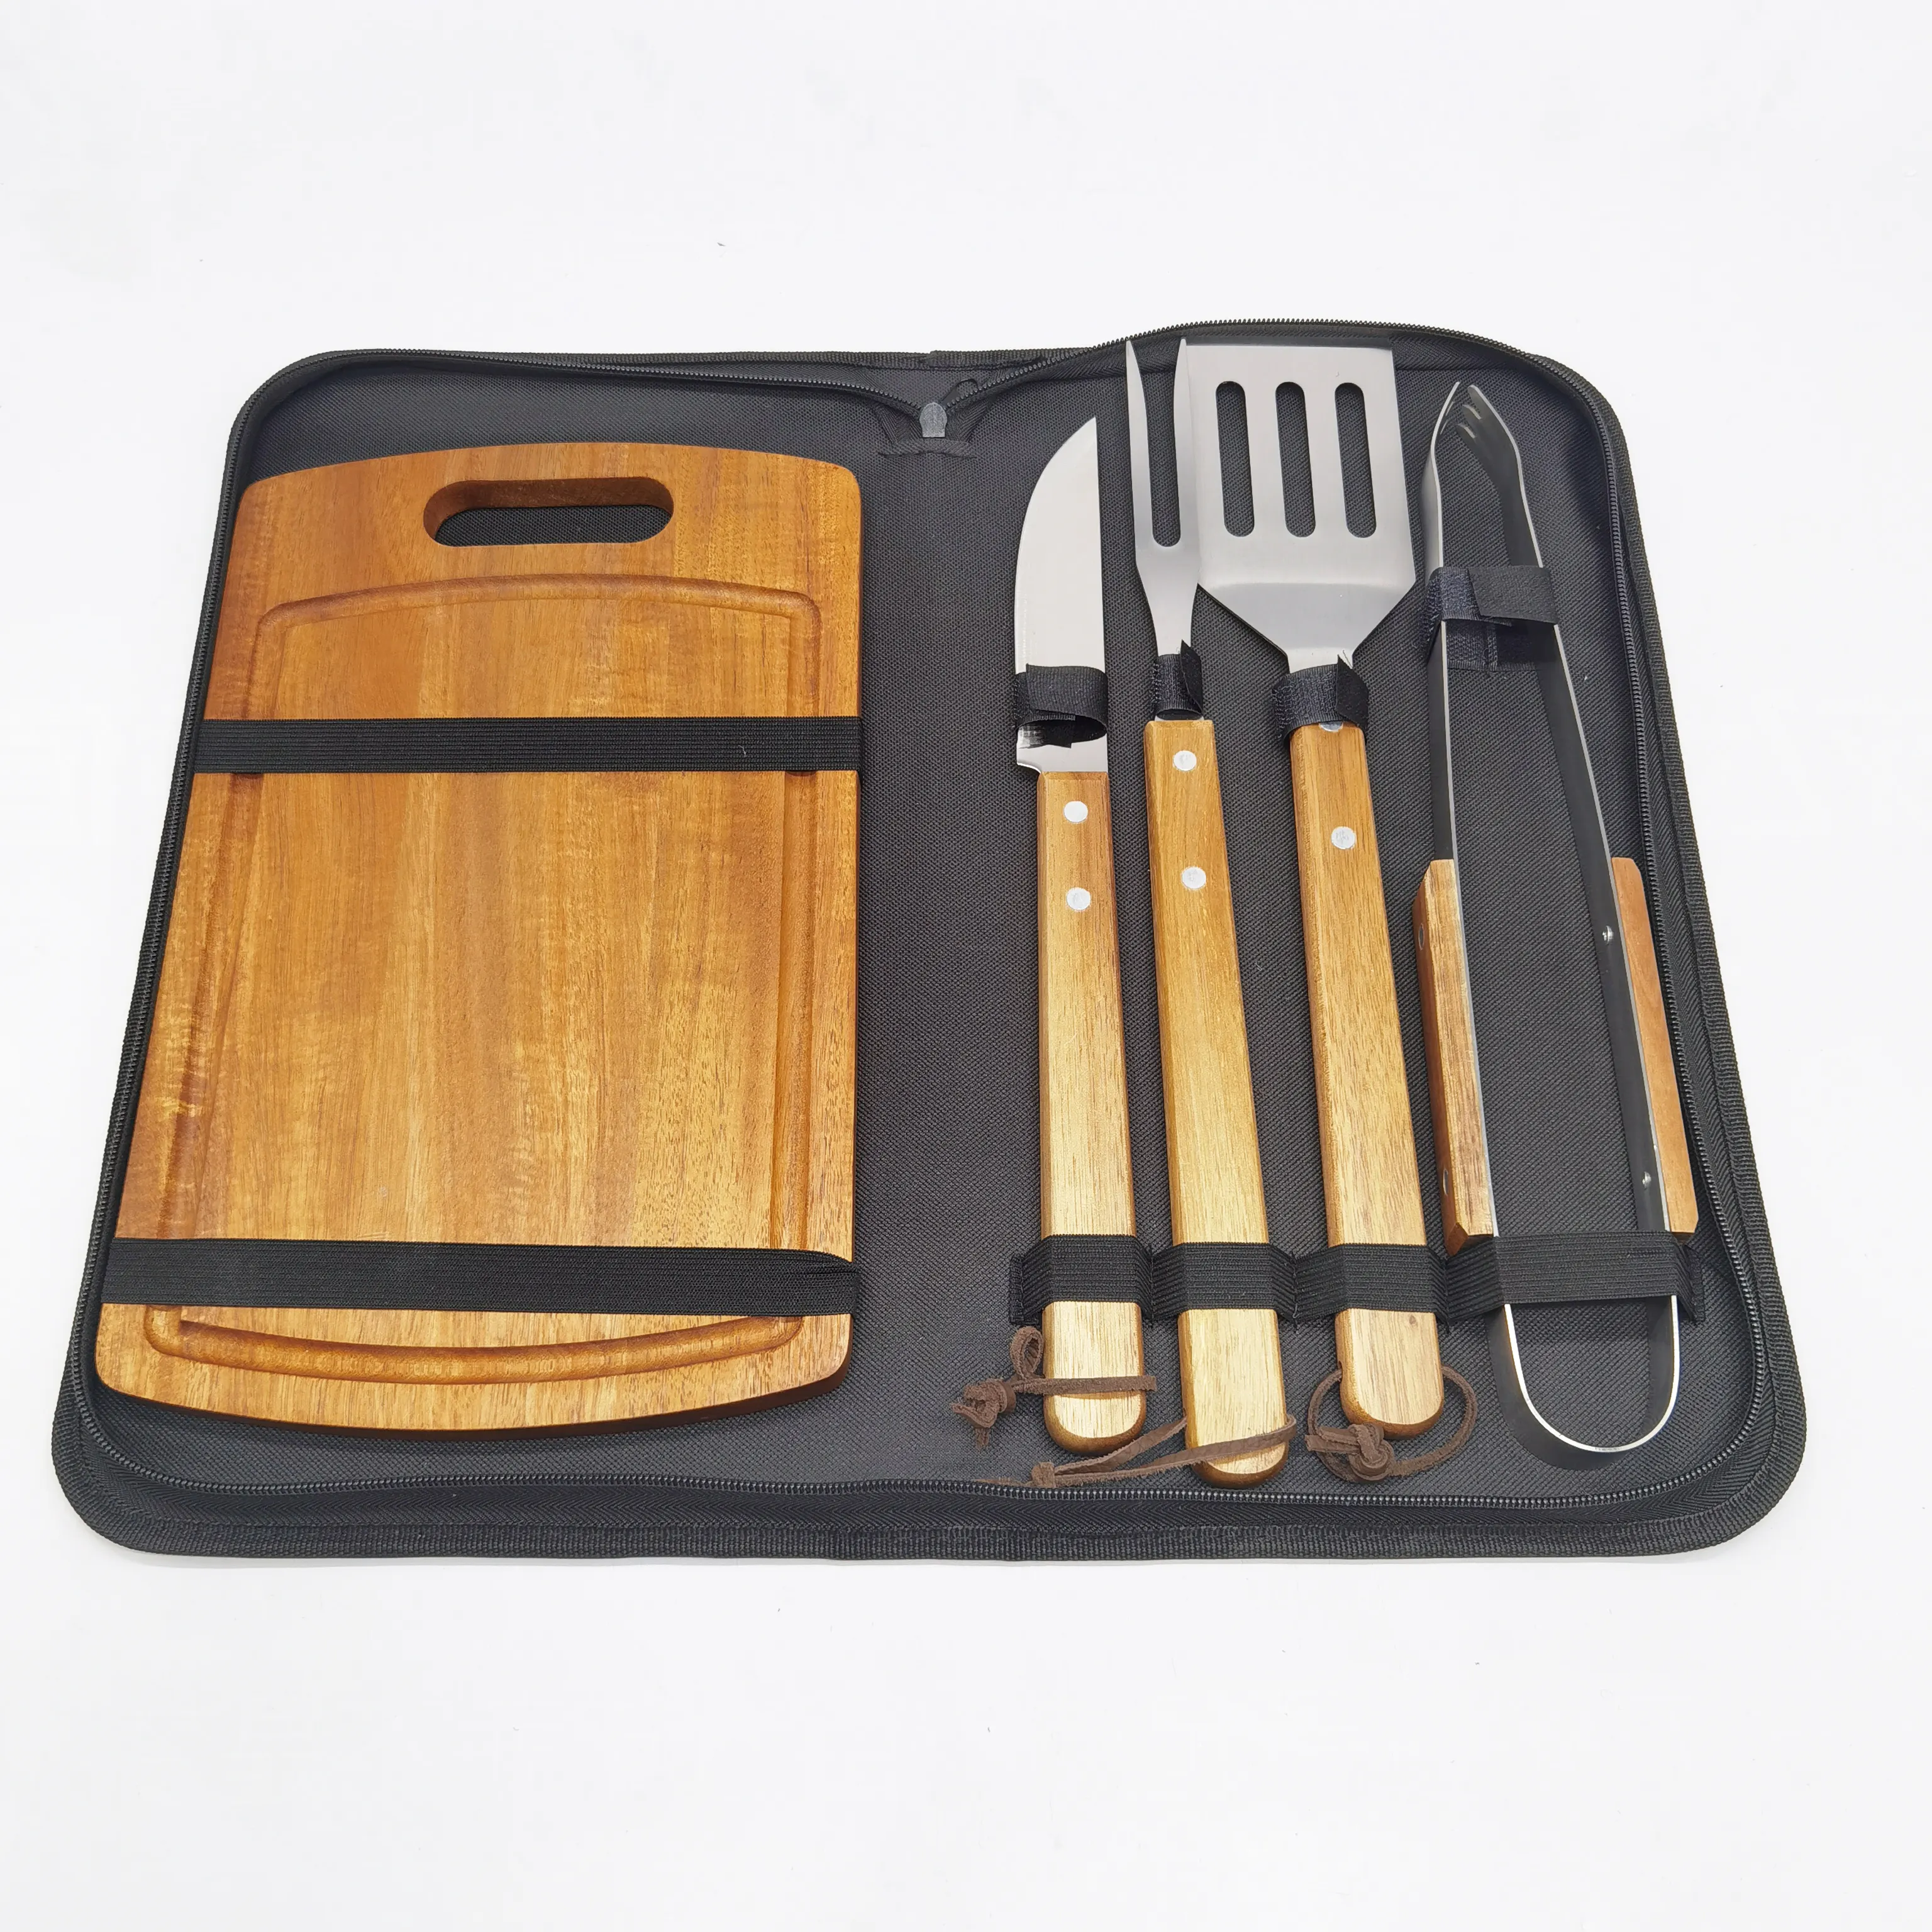 Wooden Handle Cooking Tongs Barbeque Tool Set Grilling Tools Stainless Steel Barbecue Bbq Tools Set With Cutting Board